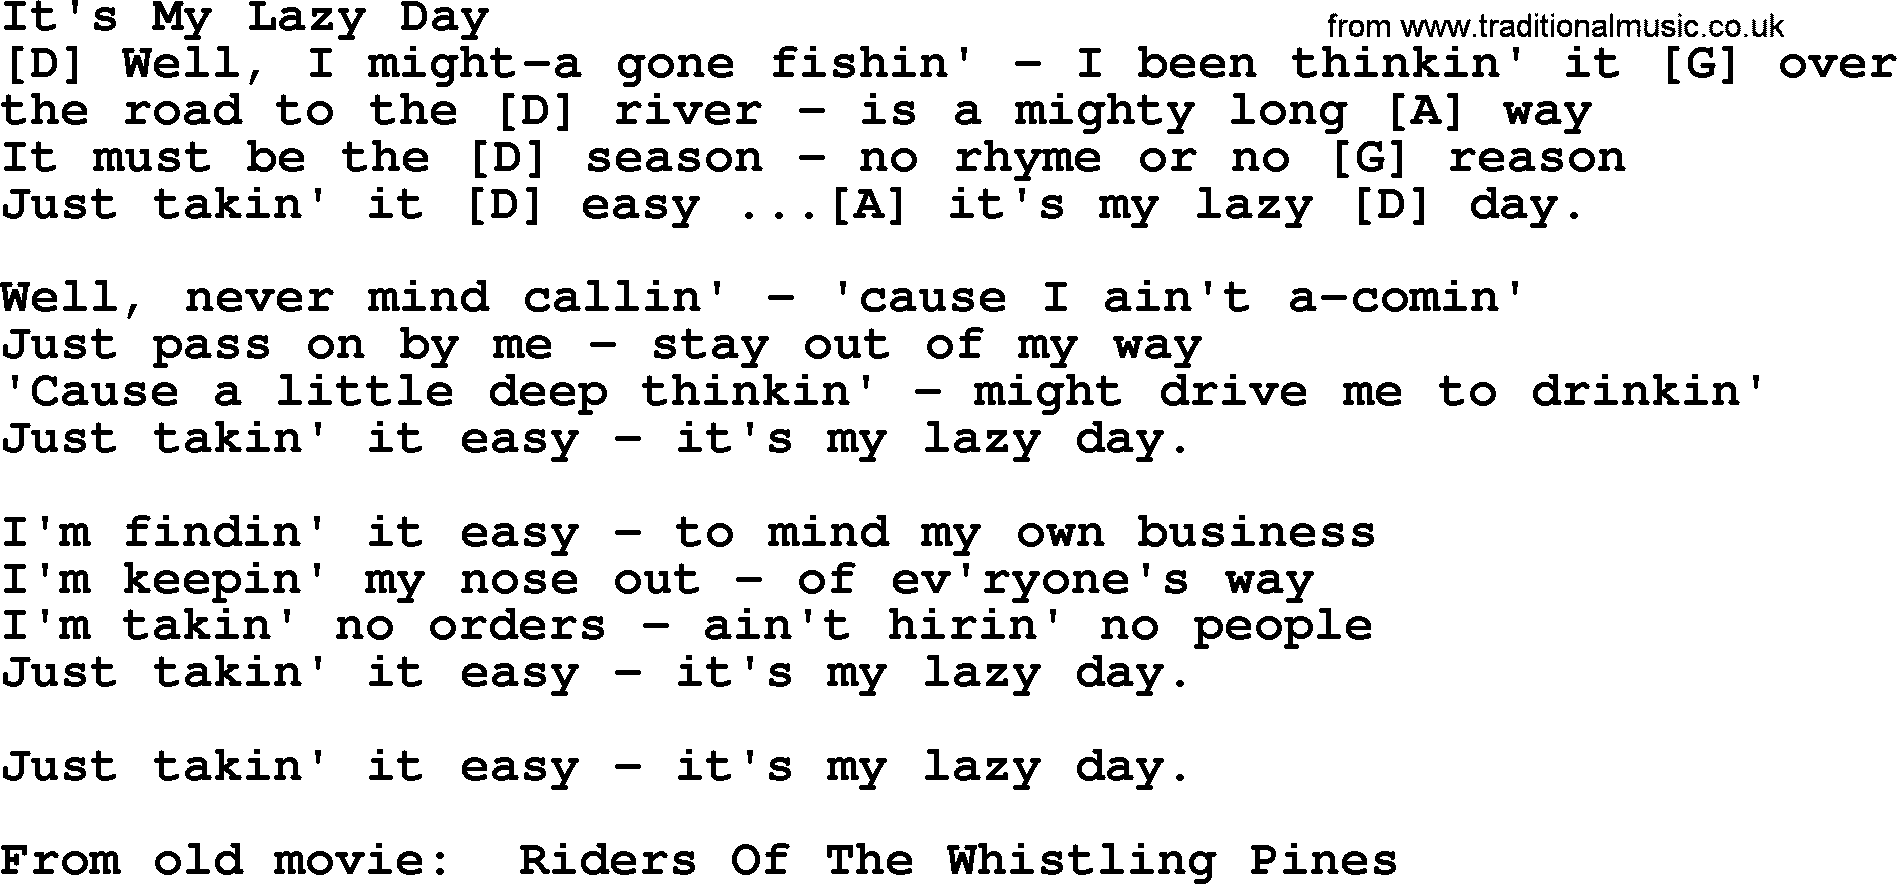 Bluegrass song: It's My Lazy Day, lyrics and chords